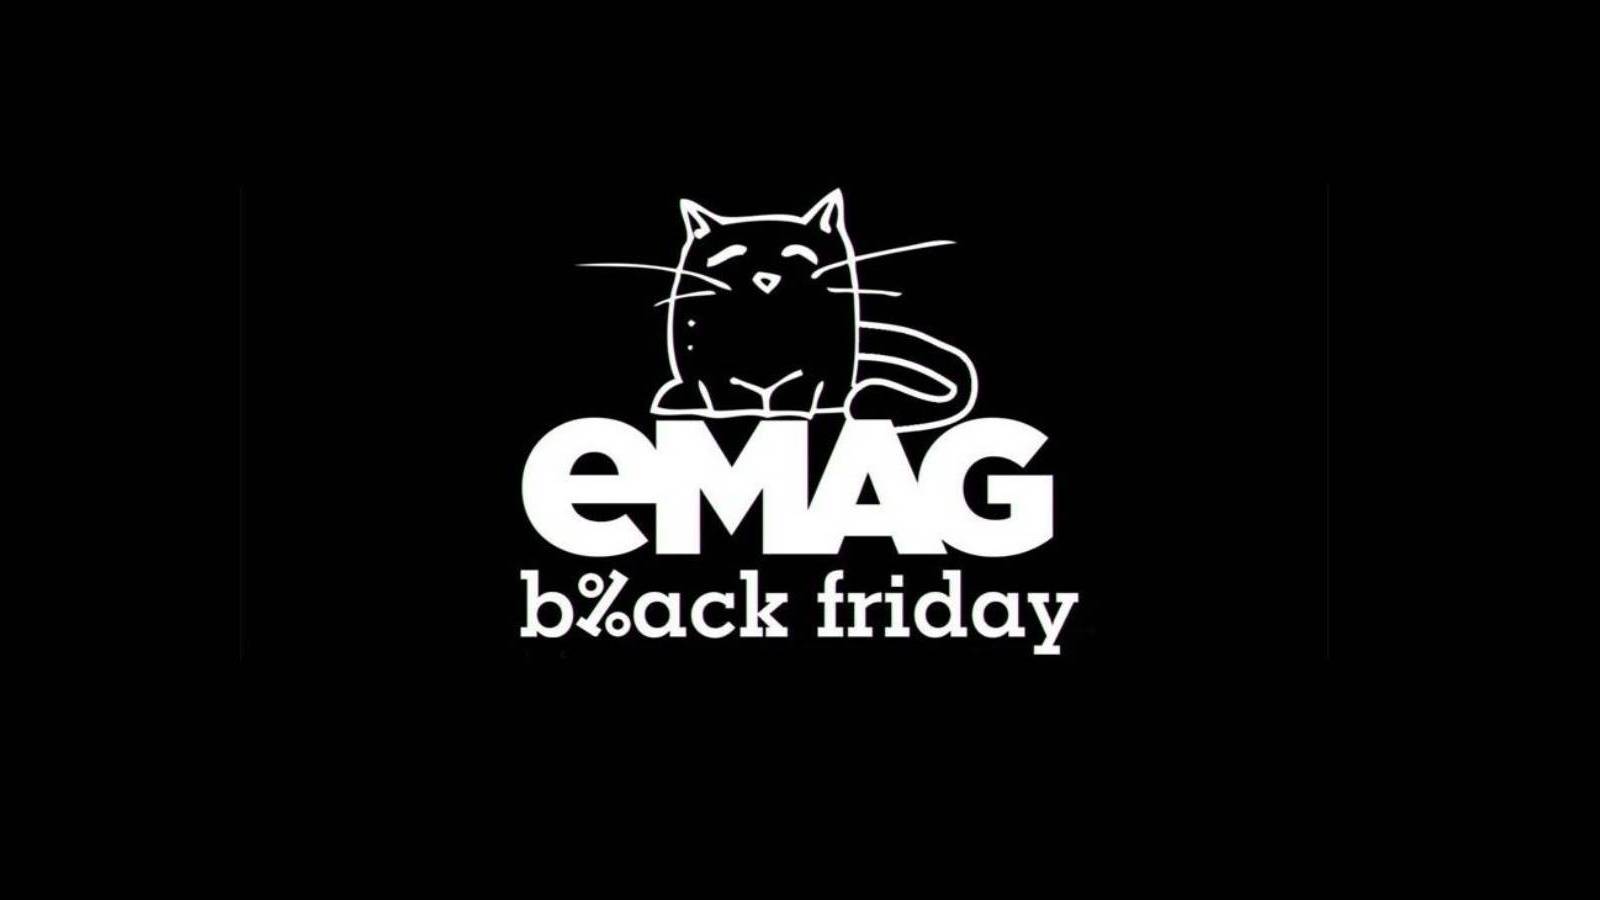 in front of Duke Incident, event ORA INCEPE EMAG BLACK FRIDAY 2020 TOATA ROMANIA | iDevice.ro